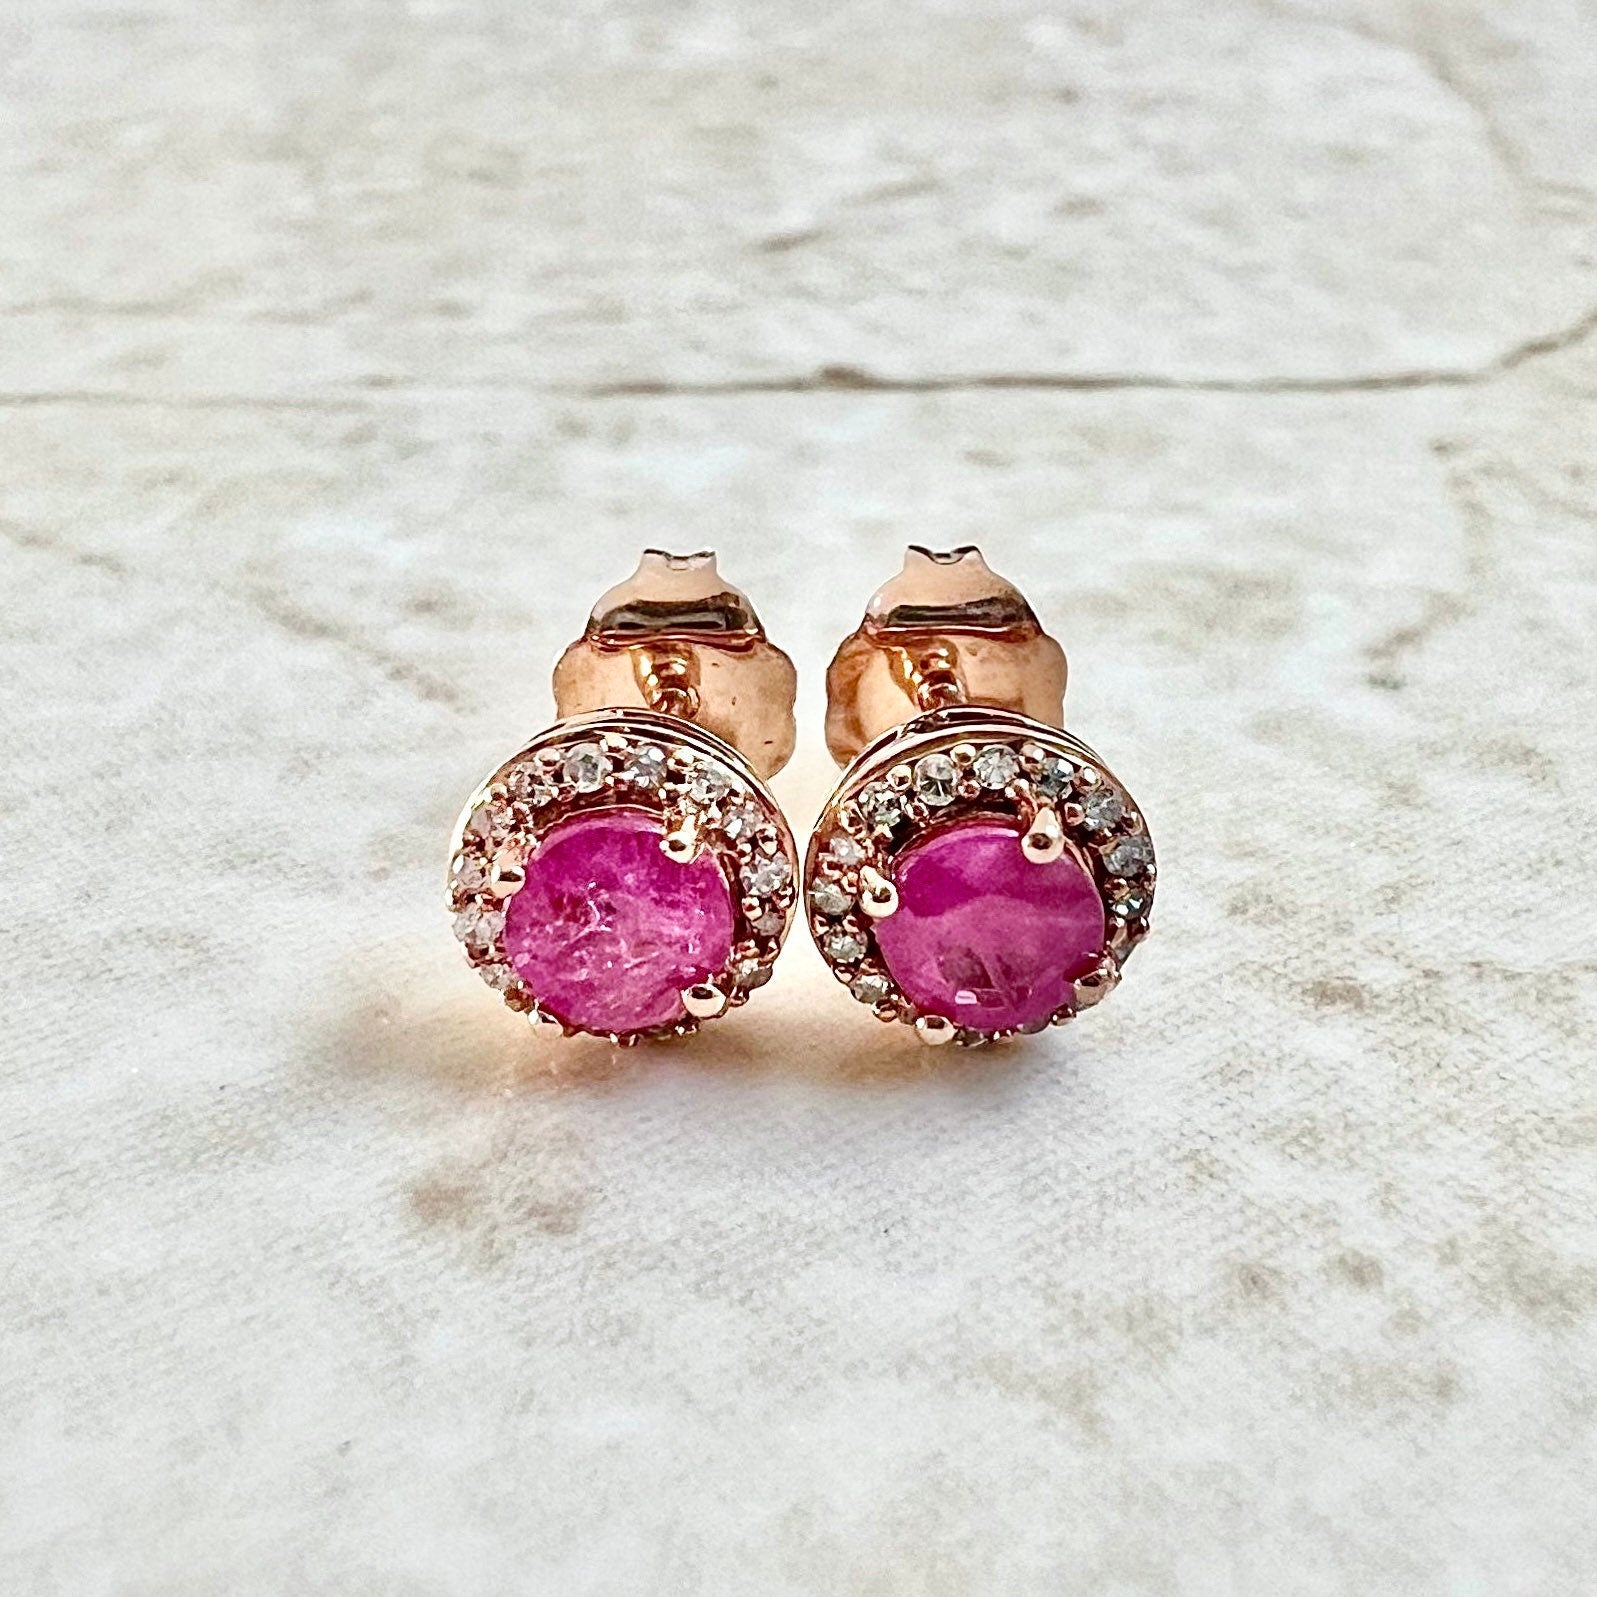 10K Round Ruby Halo Stud Earrings - Rose Gold Ruby Studs - Gold Ruby Earrings - Genuine Ruby Halo Earrings - Best July Birthstone Gift